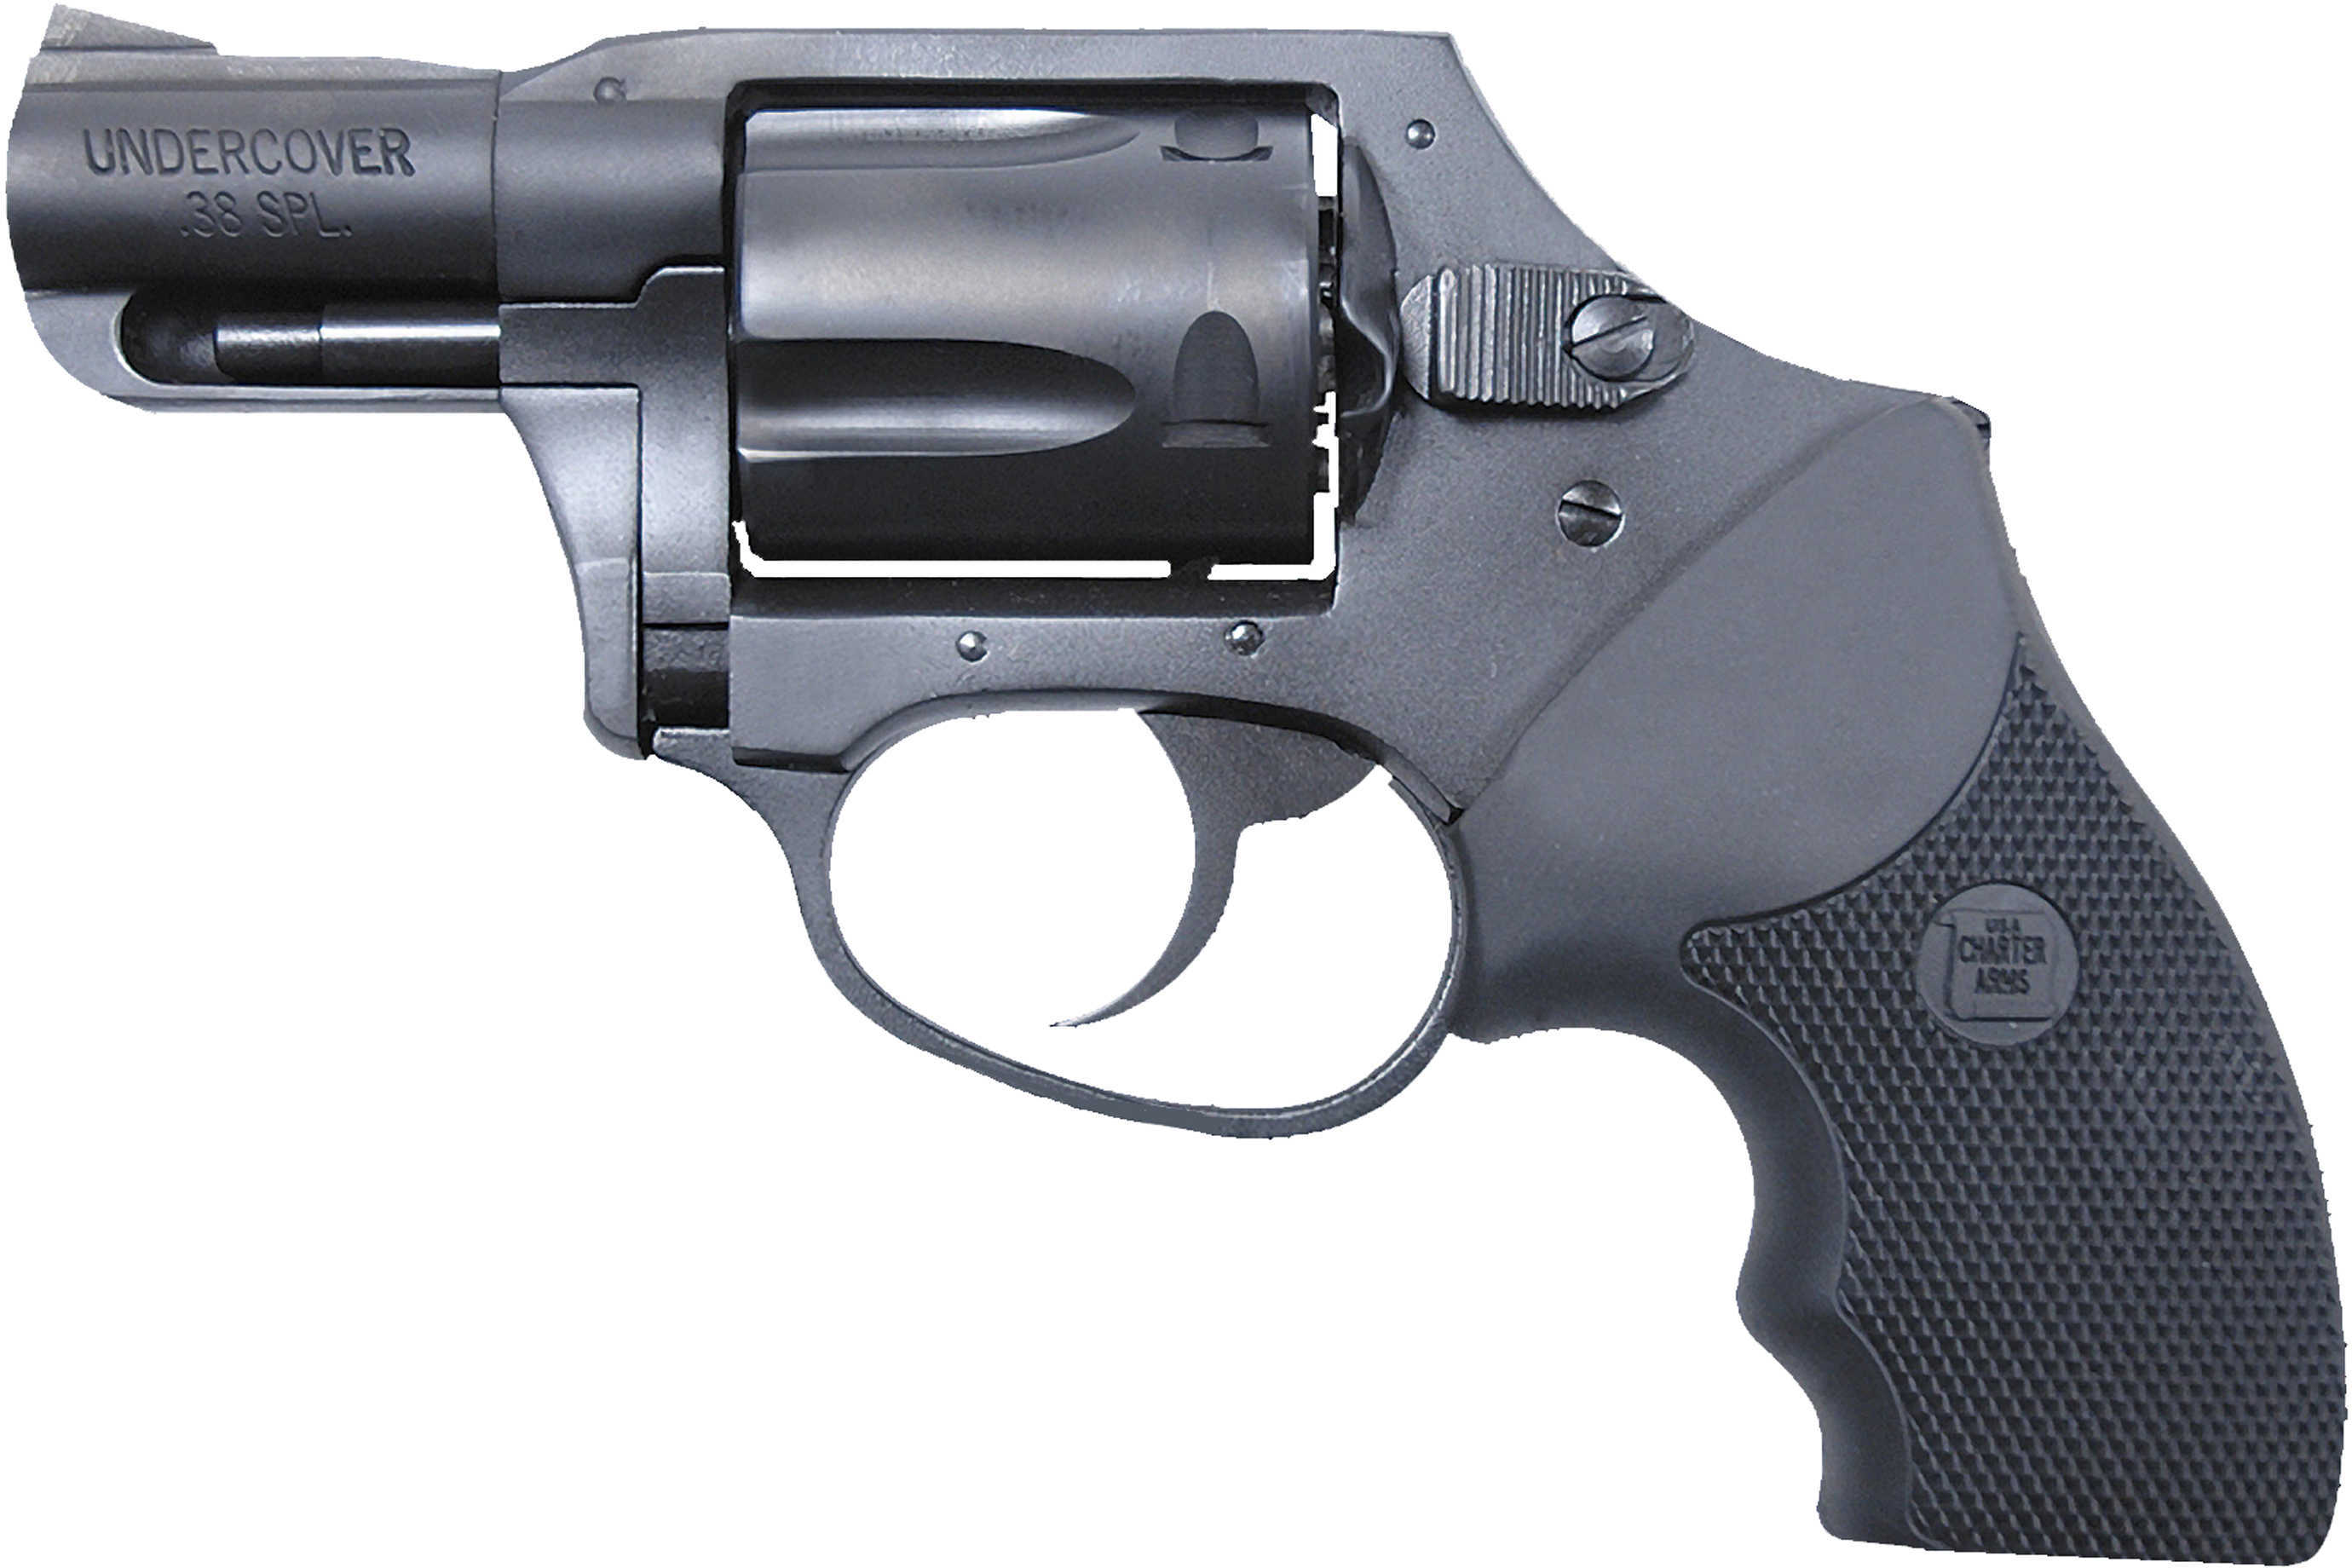 Charter Arms Undercover Revolver 38 Special 5 Round 2" Barrel Black Finish